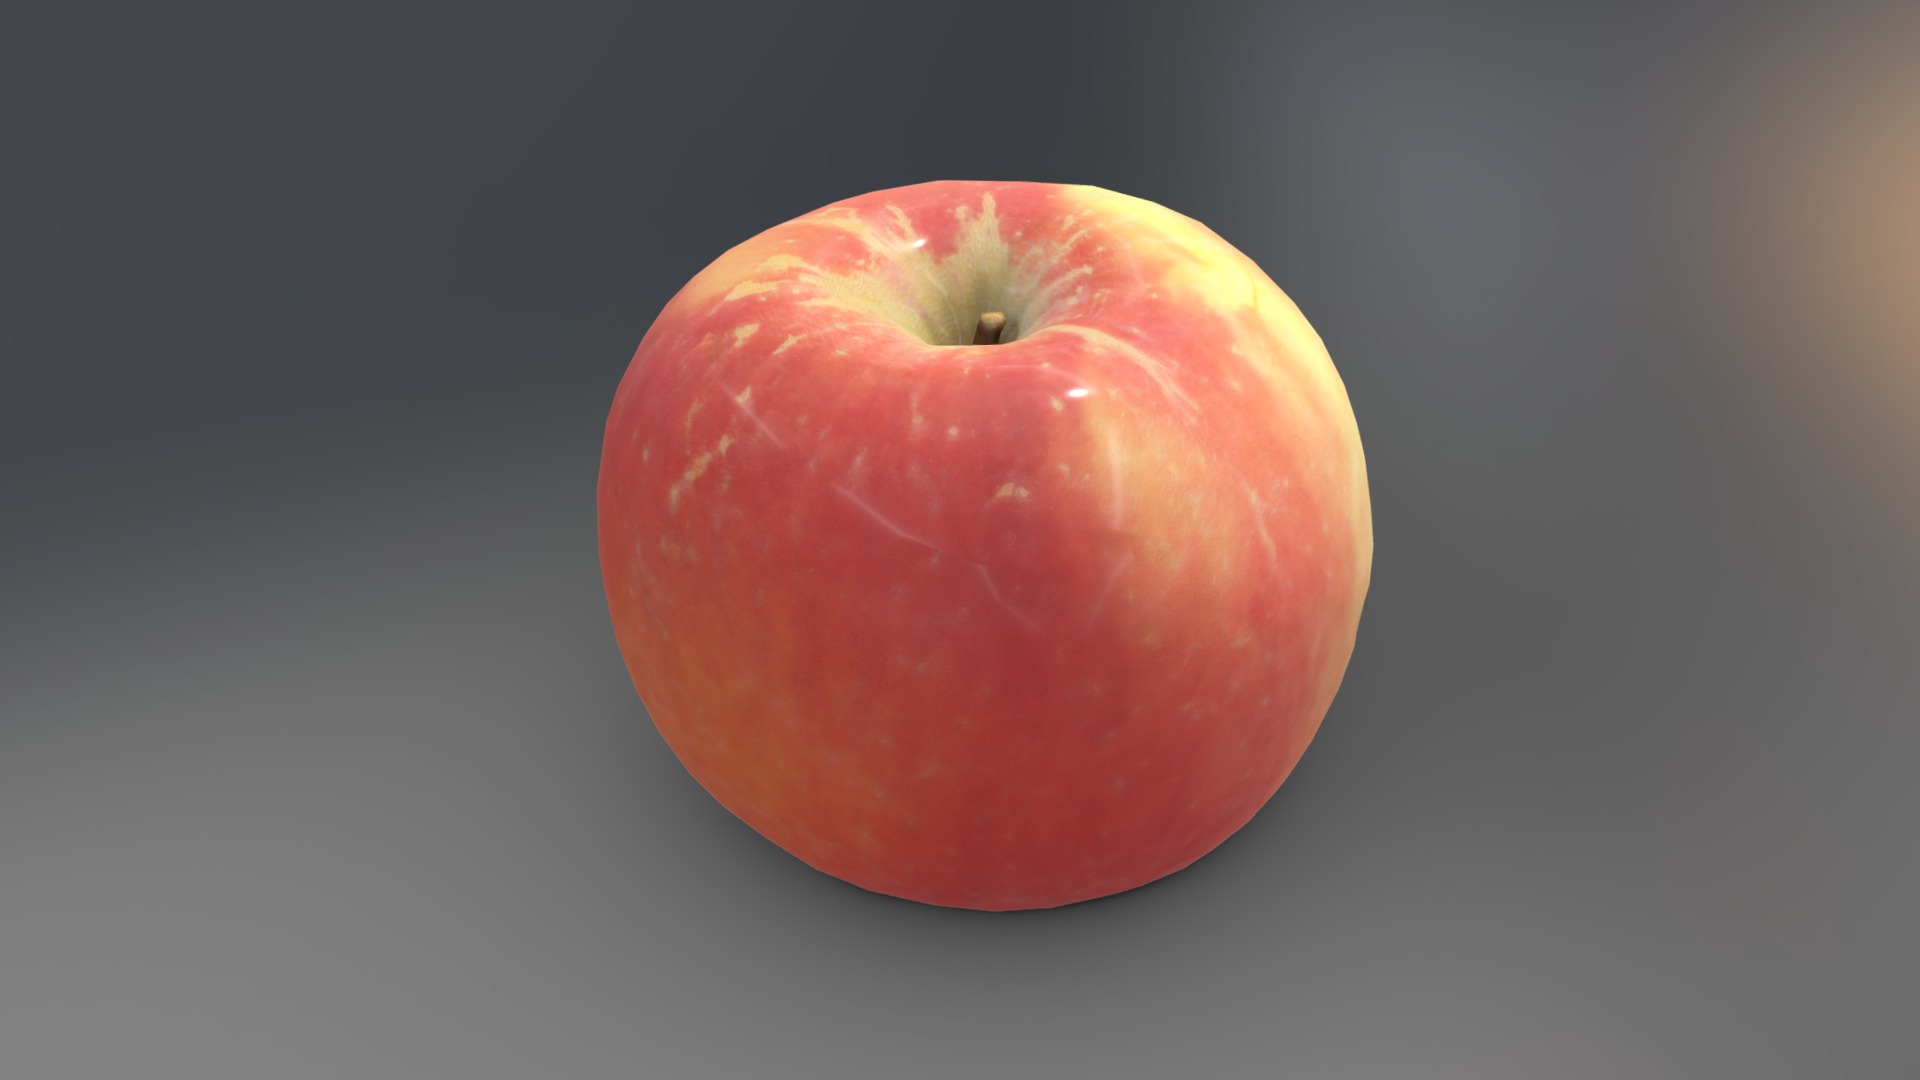 3D model Mini Apple - This is a 3D model of the Mini Apple. The 3D model is about a red apple on a black surface.